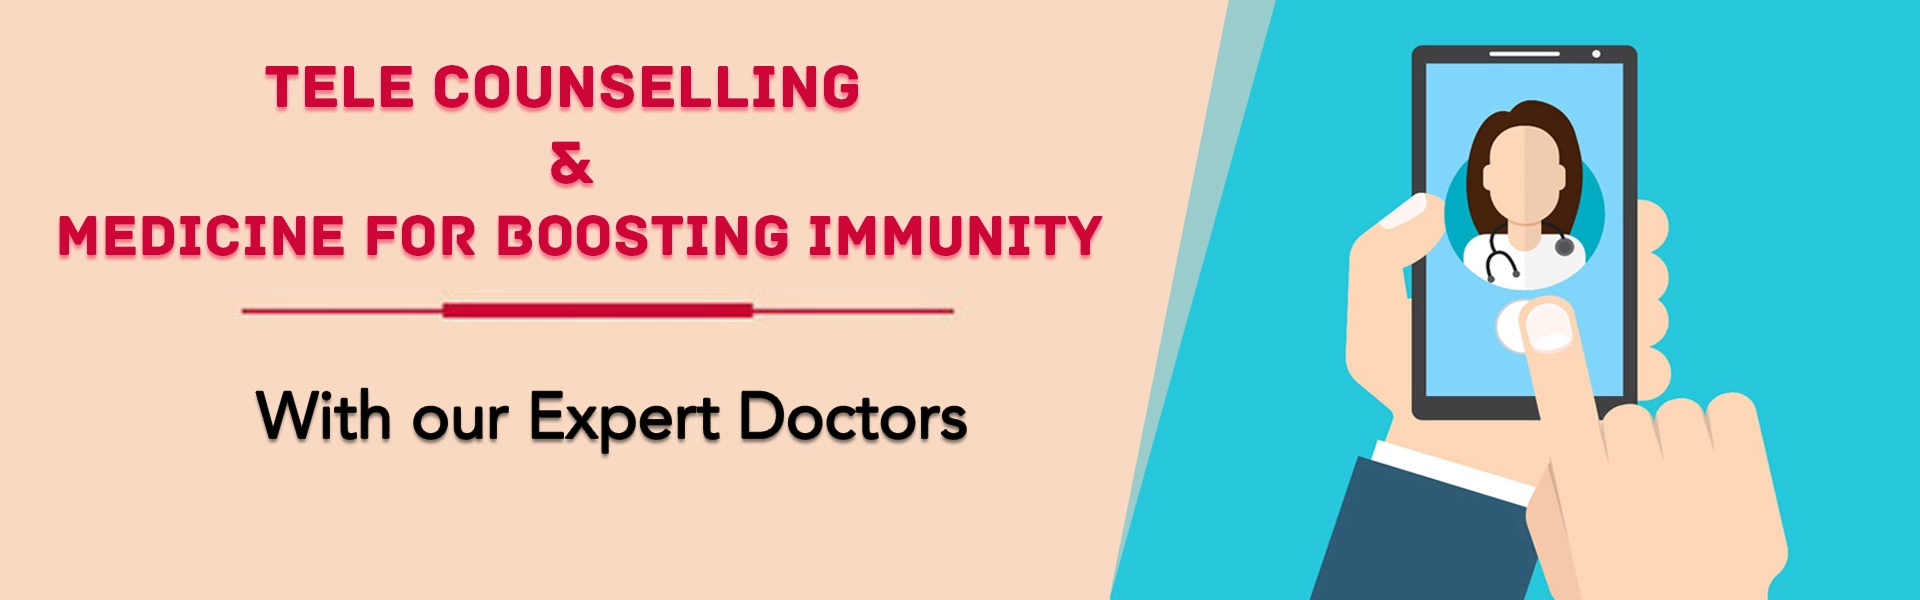 Tele Counselling and medicine for boosting immunity